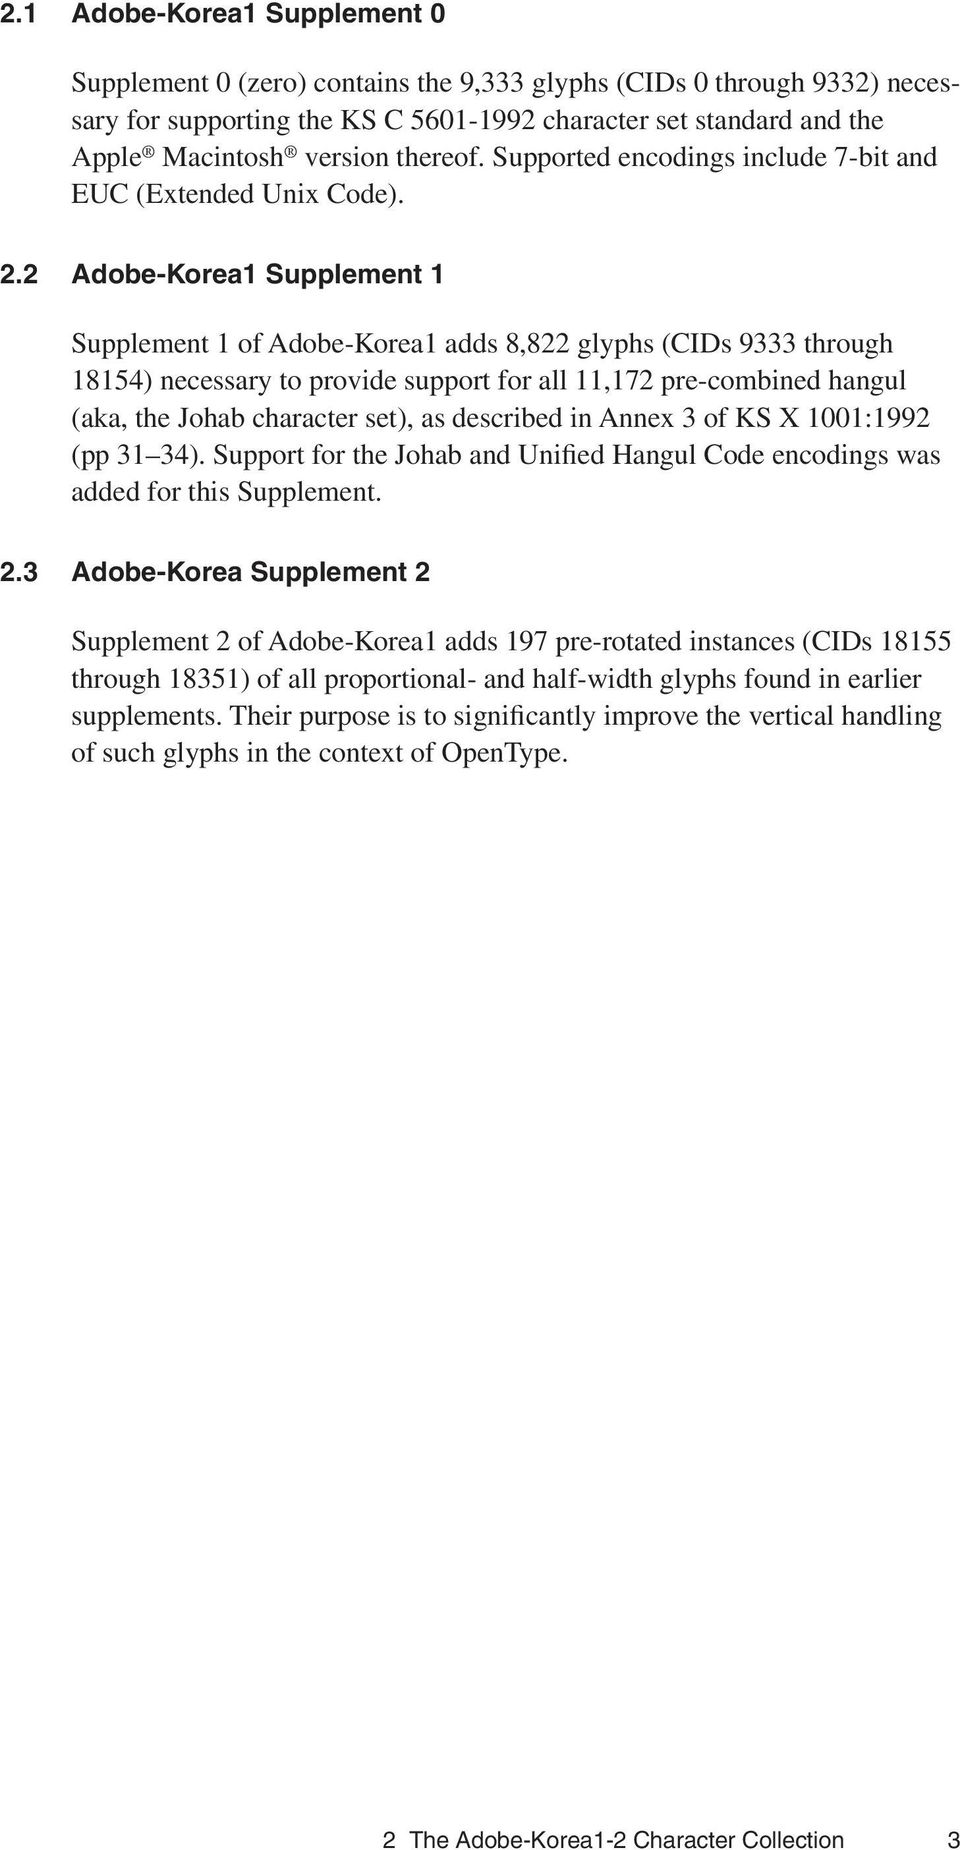 2 Adobe-Korea1 Supplement 1 Supplement 1 of Adobe-Korea1 adds 8,822 glyphs (CIDs 9333 through 18154) necessary to provide support for all 11,172 pre-combined hangul (aka, the Johab character set), as